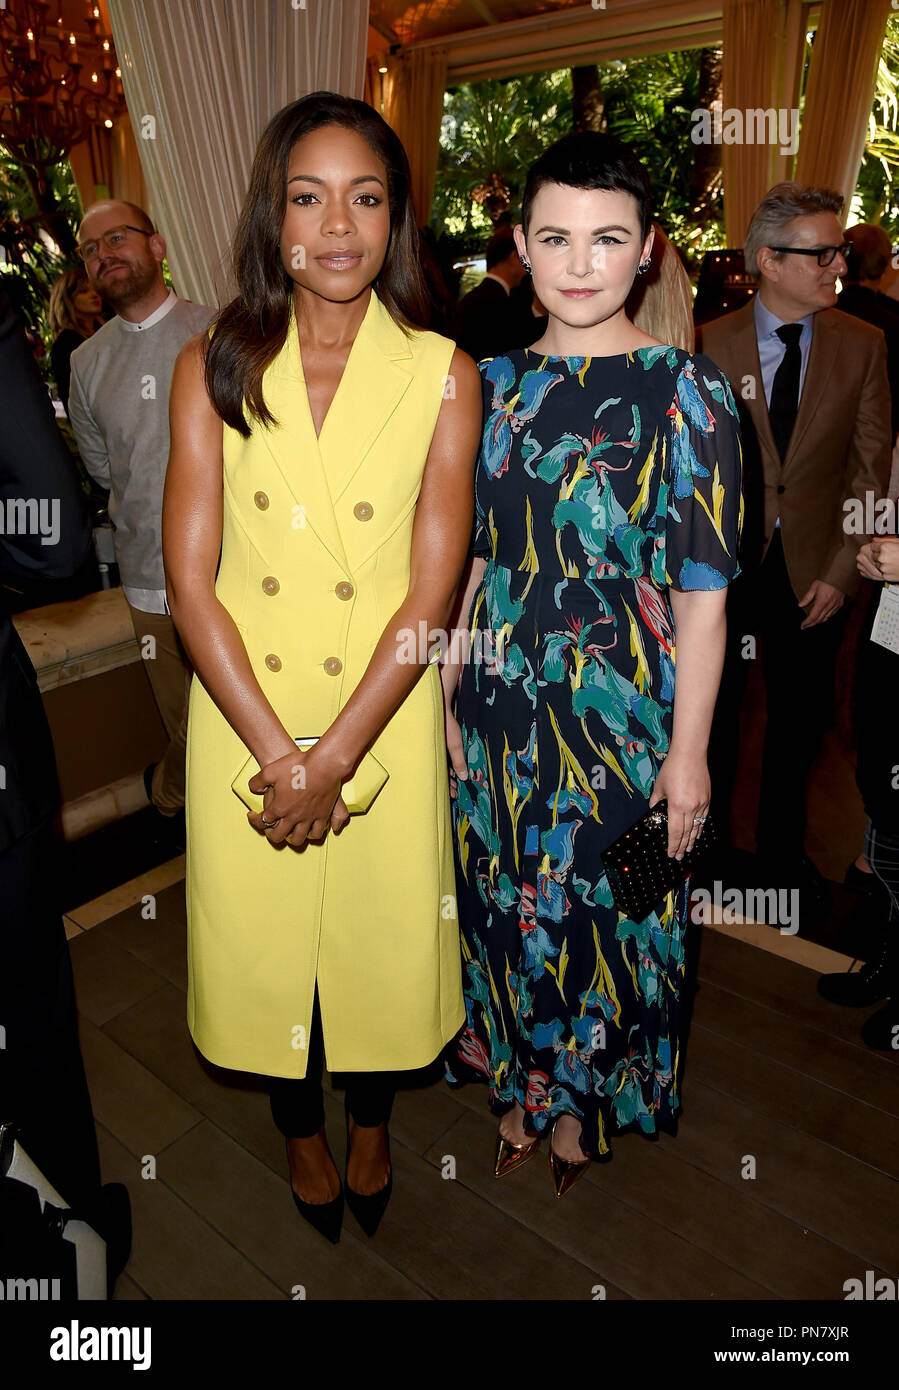 LOS ANGELES, CA - JANUARY 06:  Actresses Naomie Harris (L) and Ginnifer Goodwin attend the 17th annual AFI Awards at Four Seasons Los Angeles at Beverly Hills on January 6, 2017 in Los Angeles, California. Photo: AFI Stock Photo